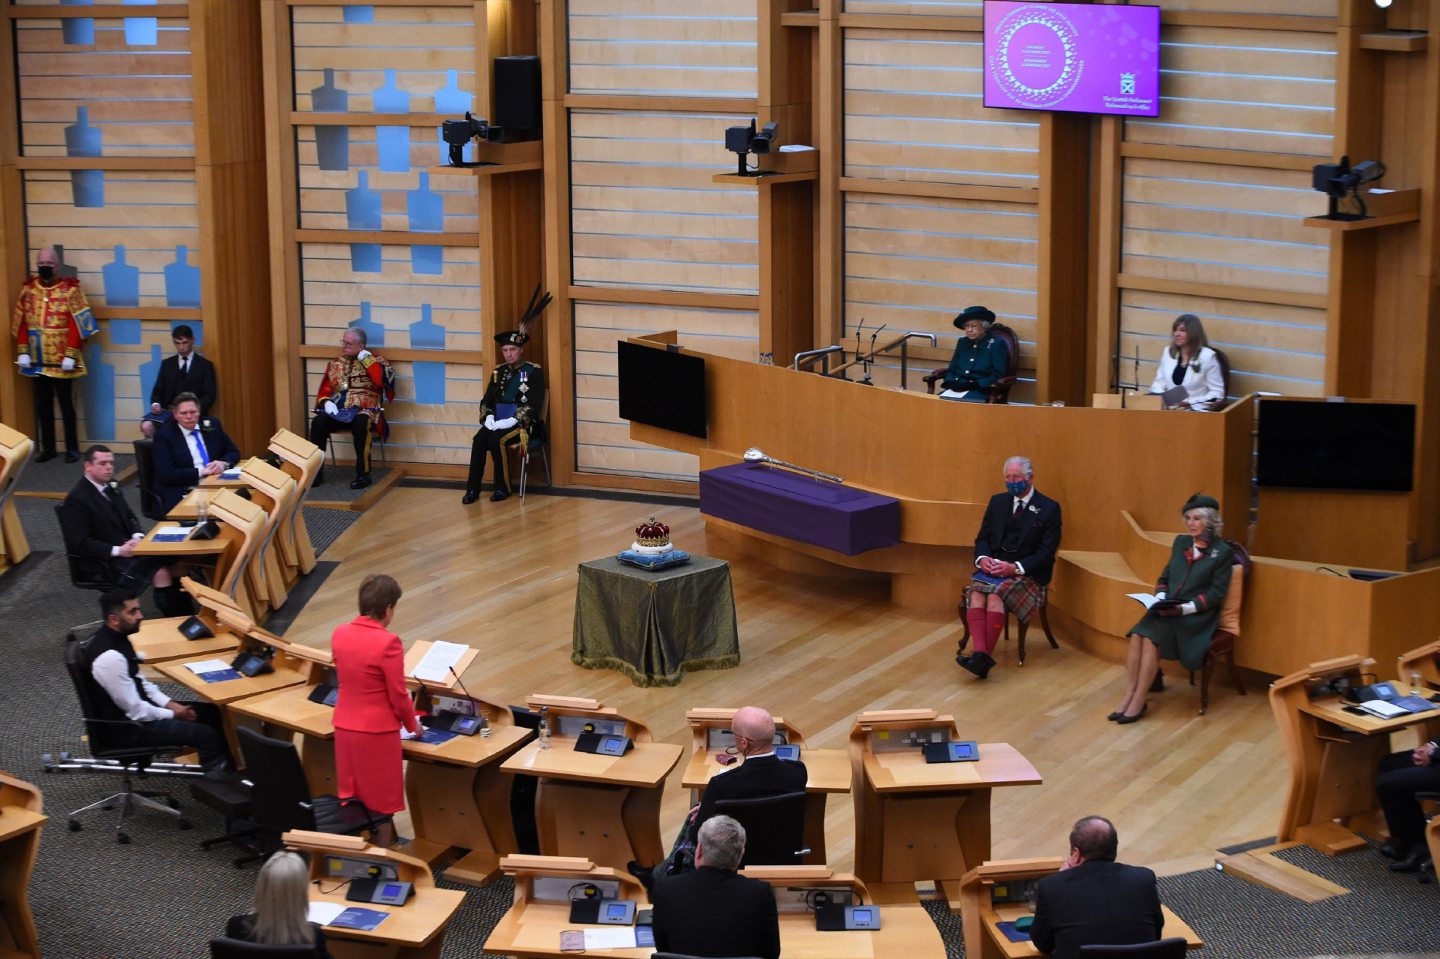 Queen Elizabeth was joined by Prince Charles and Camilla on the opening of Scottish Parliament in October 2021.